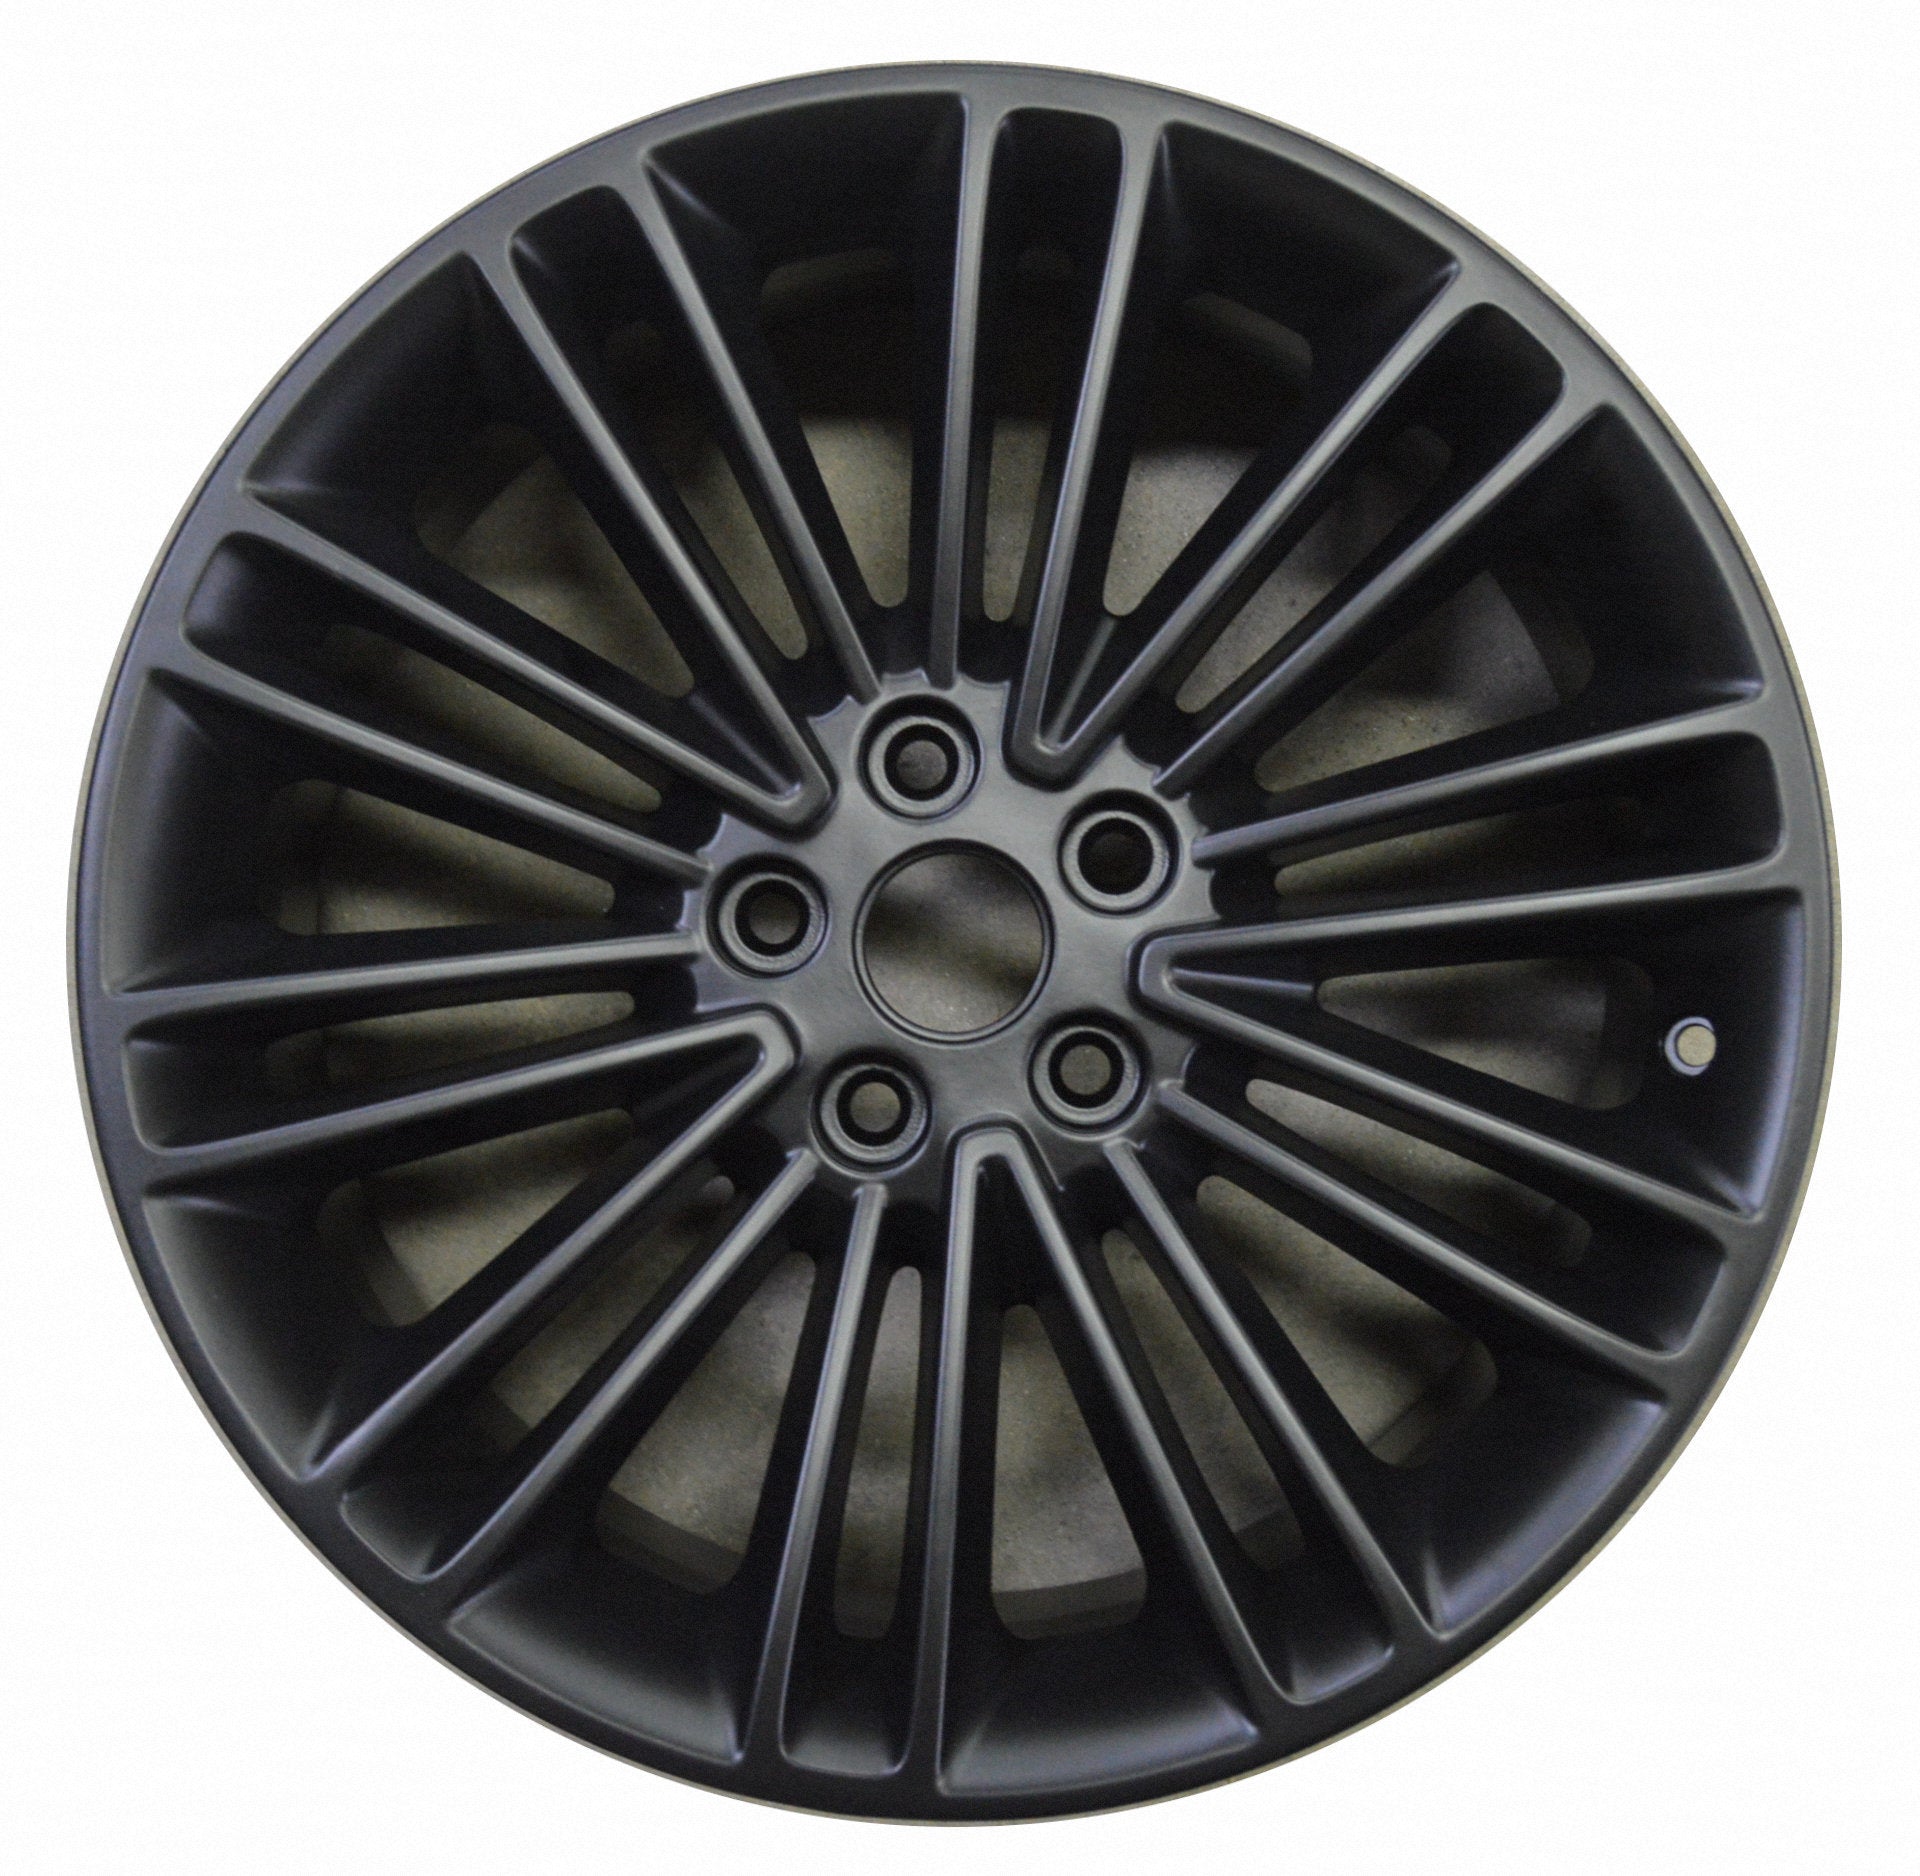 Ford Fusion  2013, 2014, 2015, 2016 Factory OEM Car Wheel Size 18x8 Alloy WAO.3960.PB02.FF